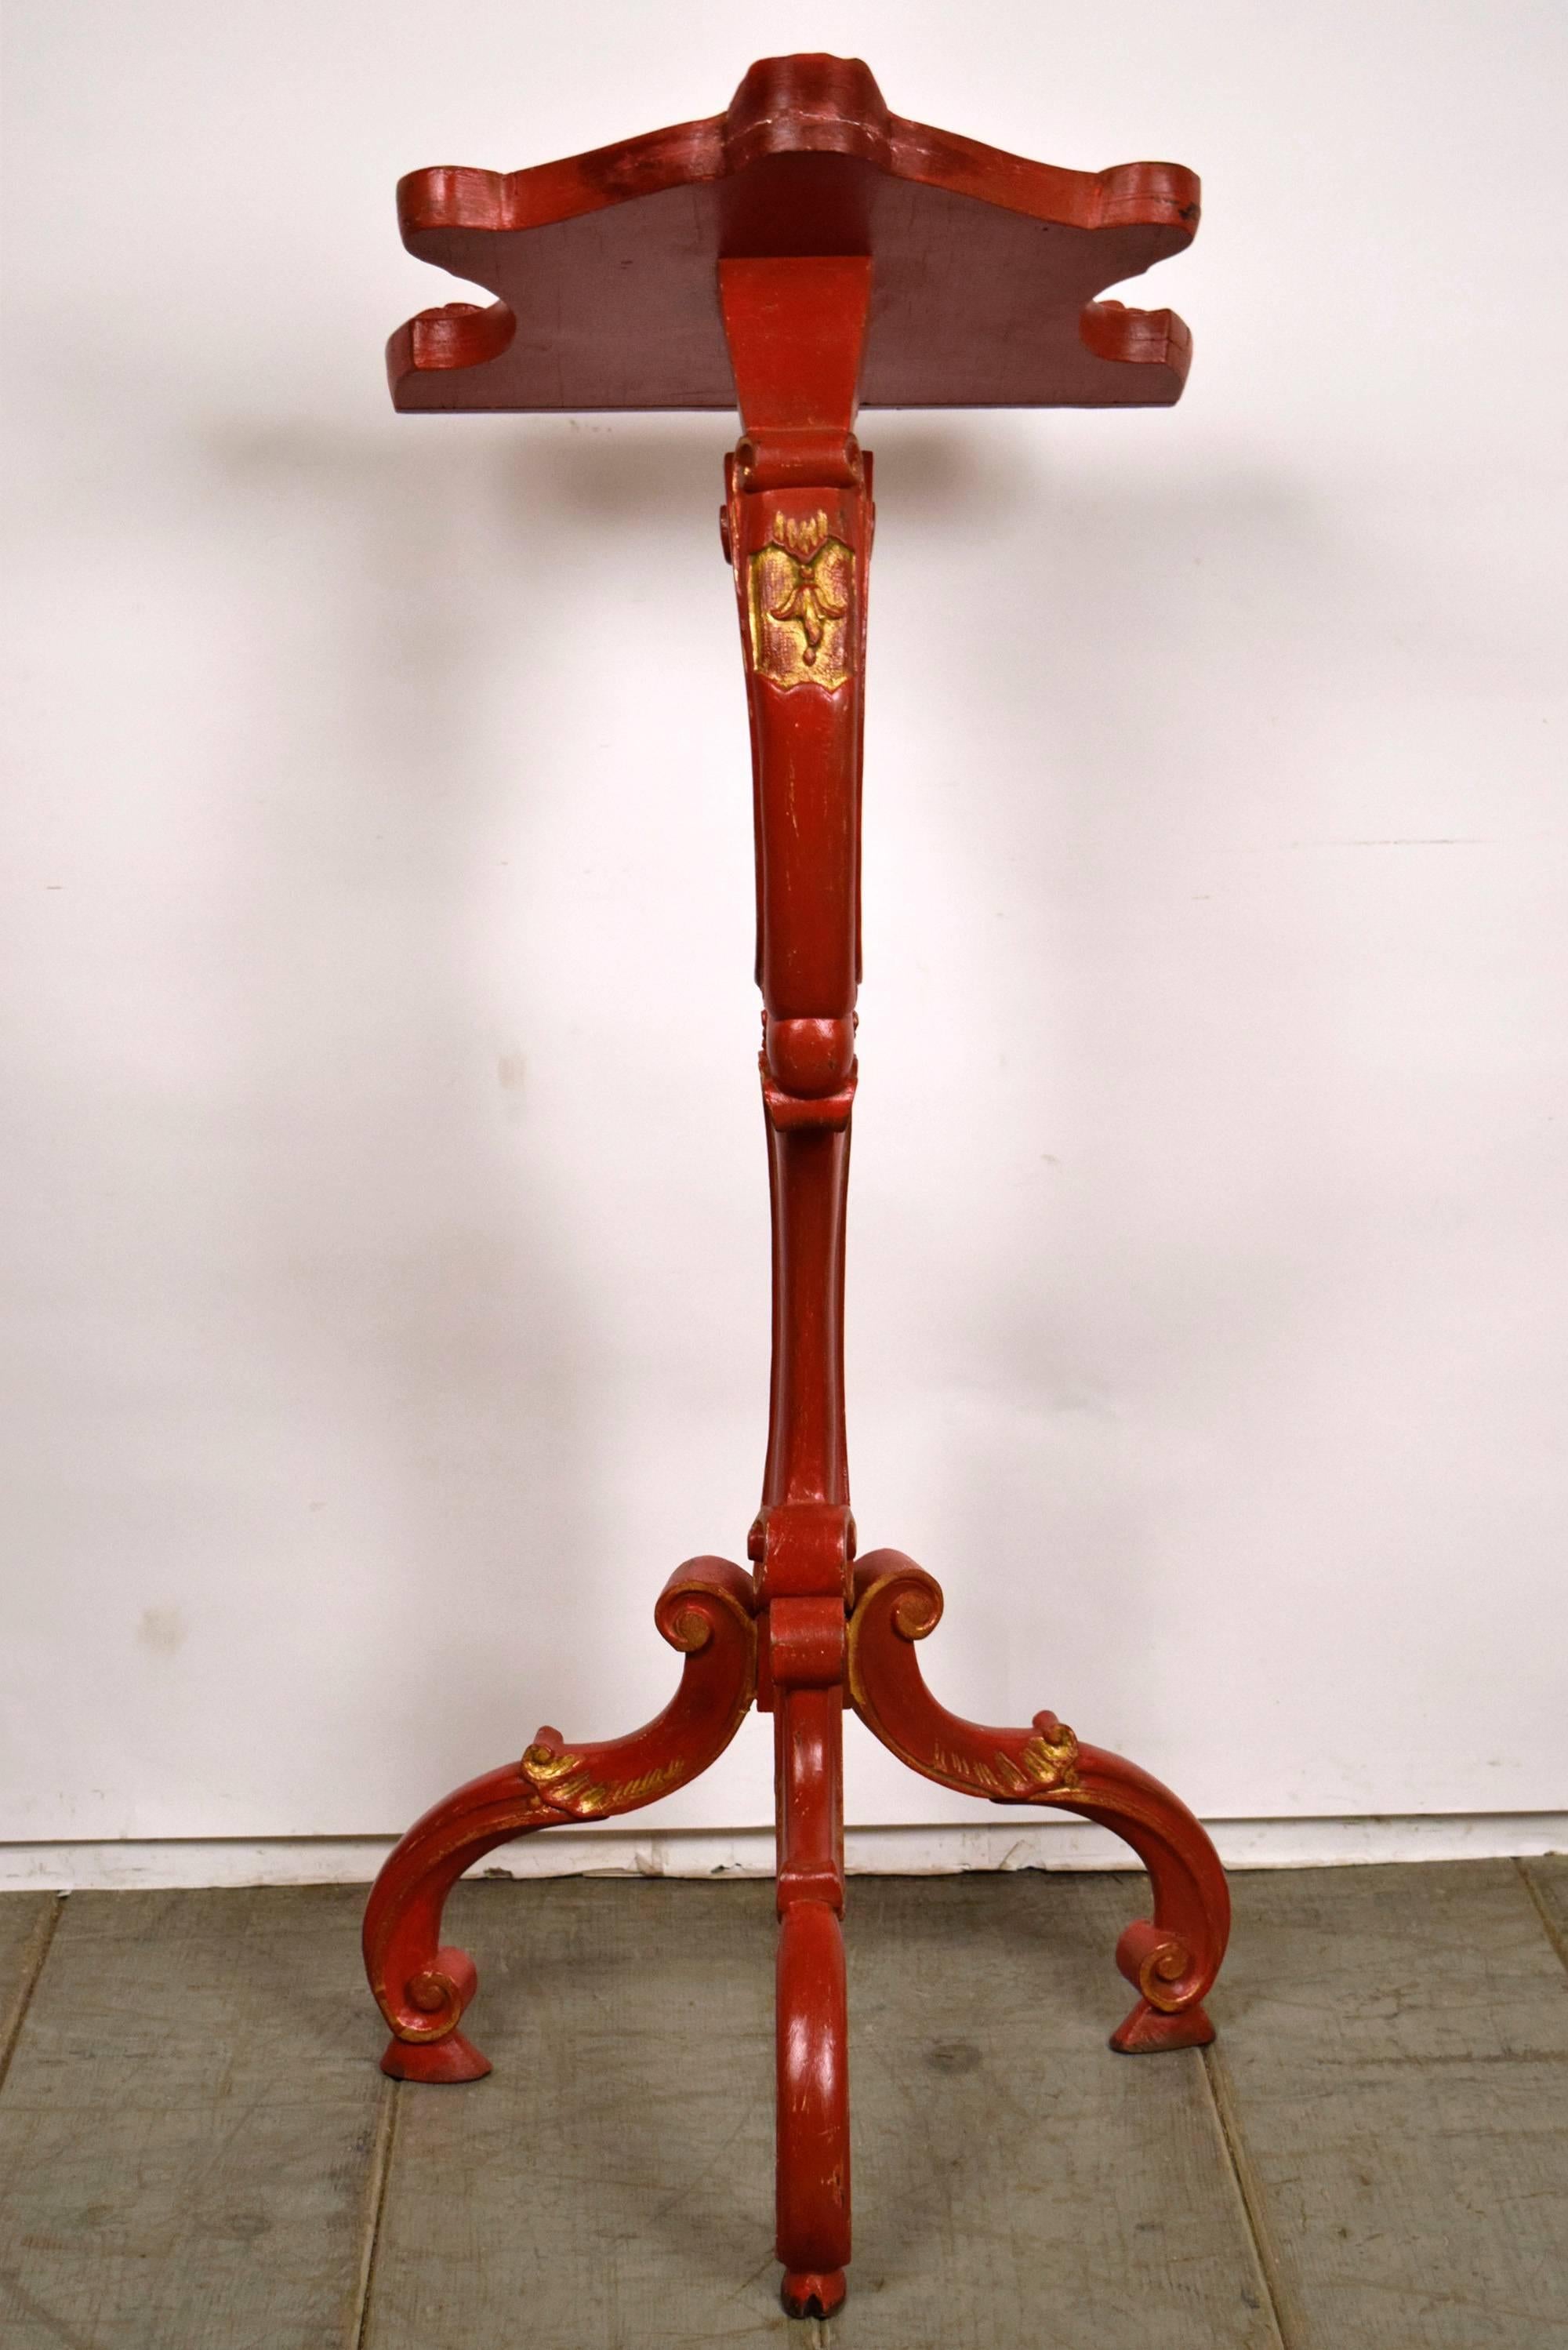 Rococo Revival Antique Venetian PolyChromed Music Stand